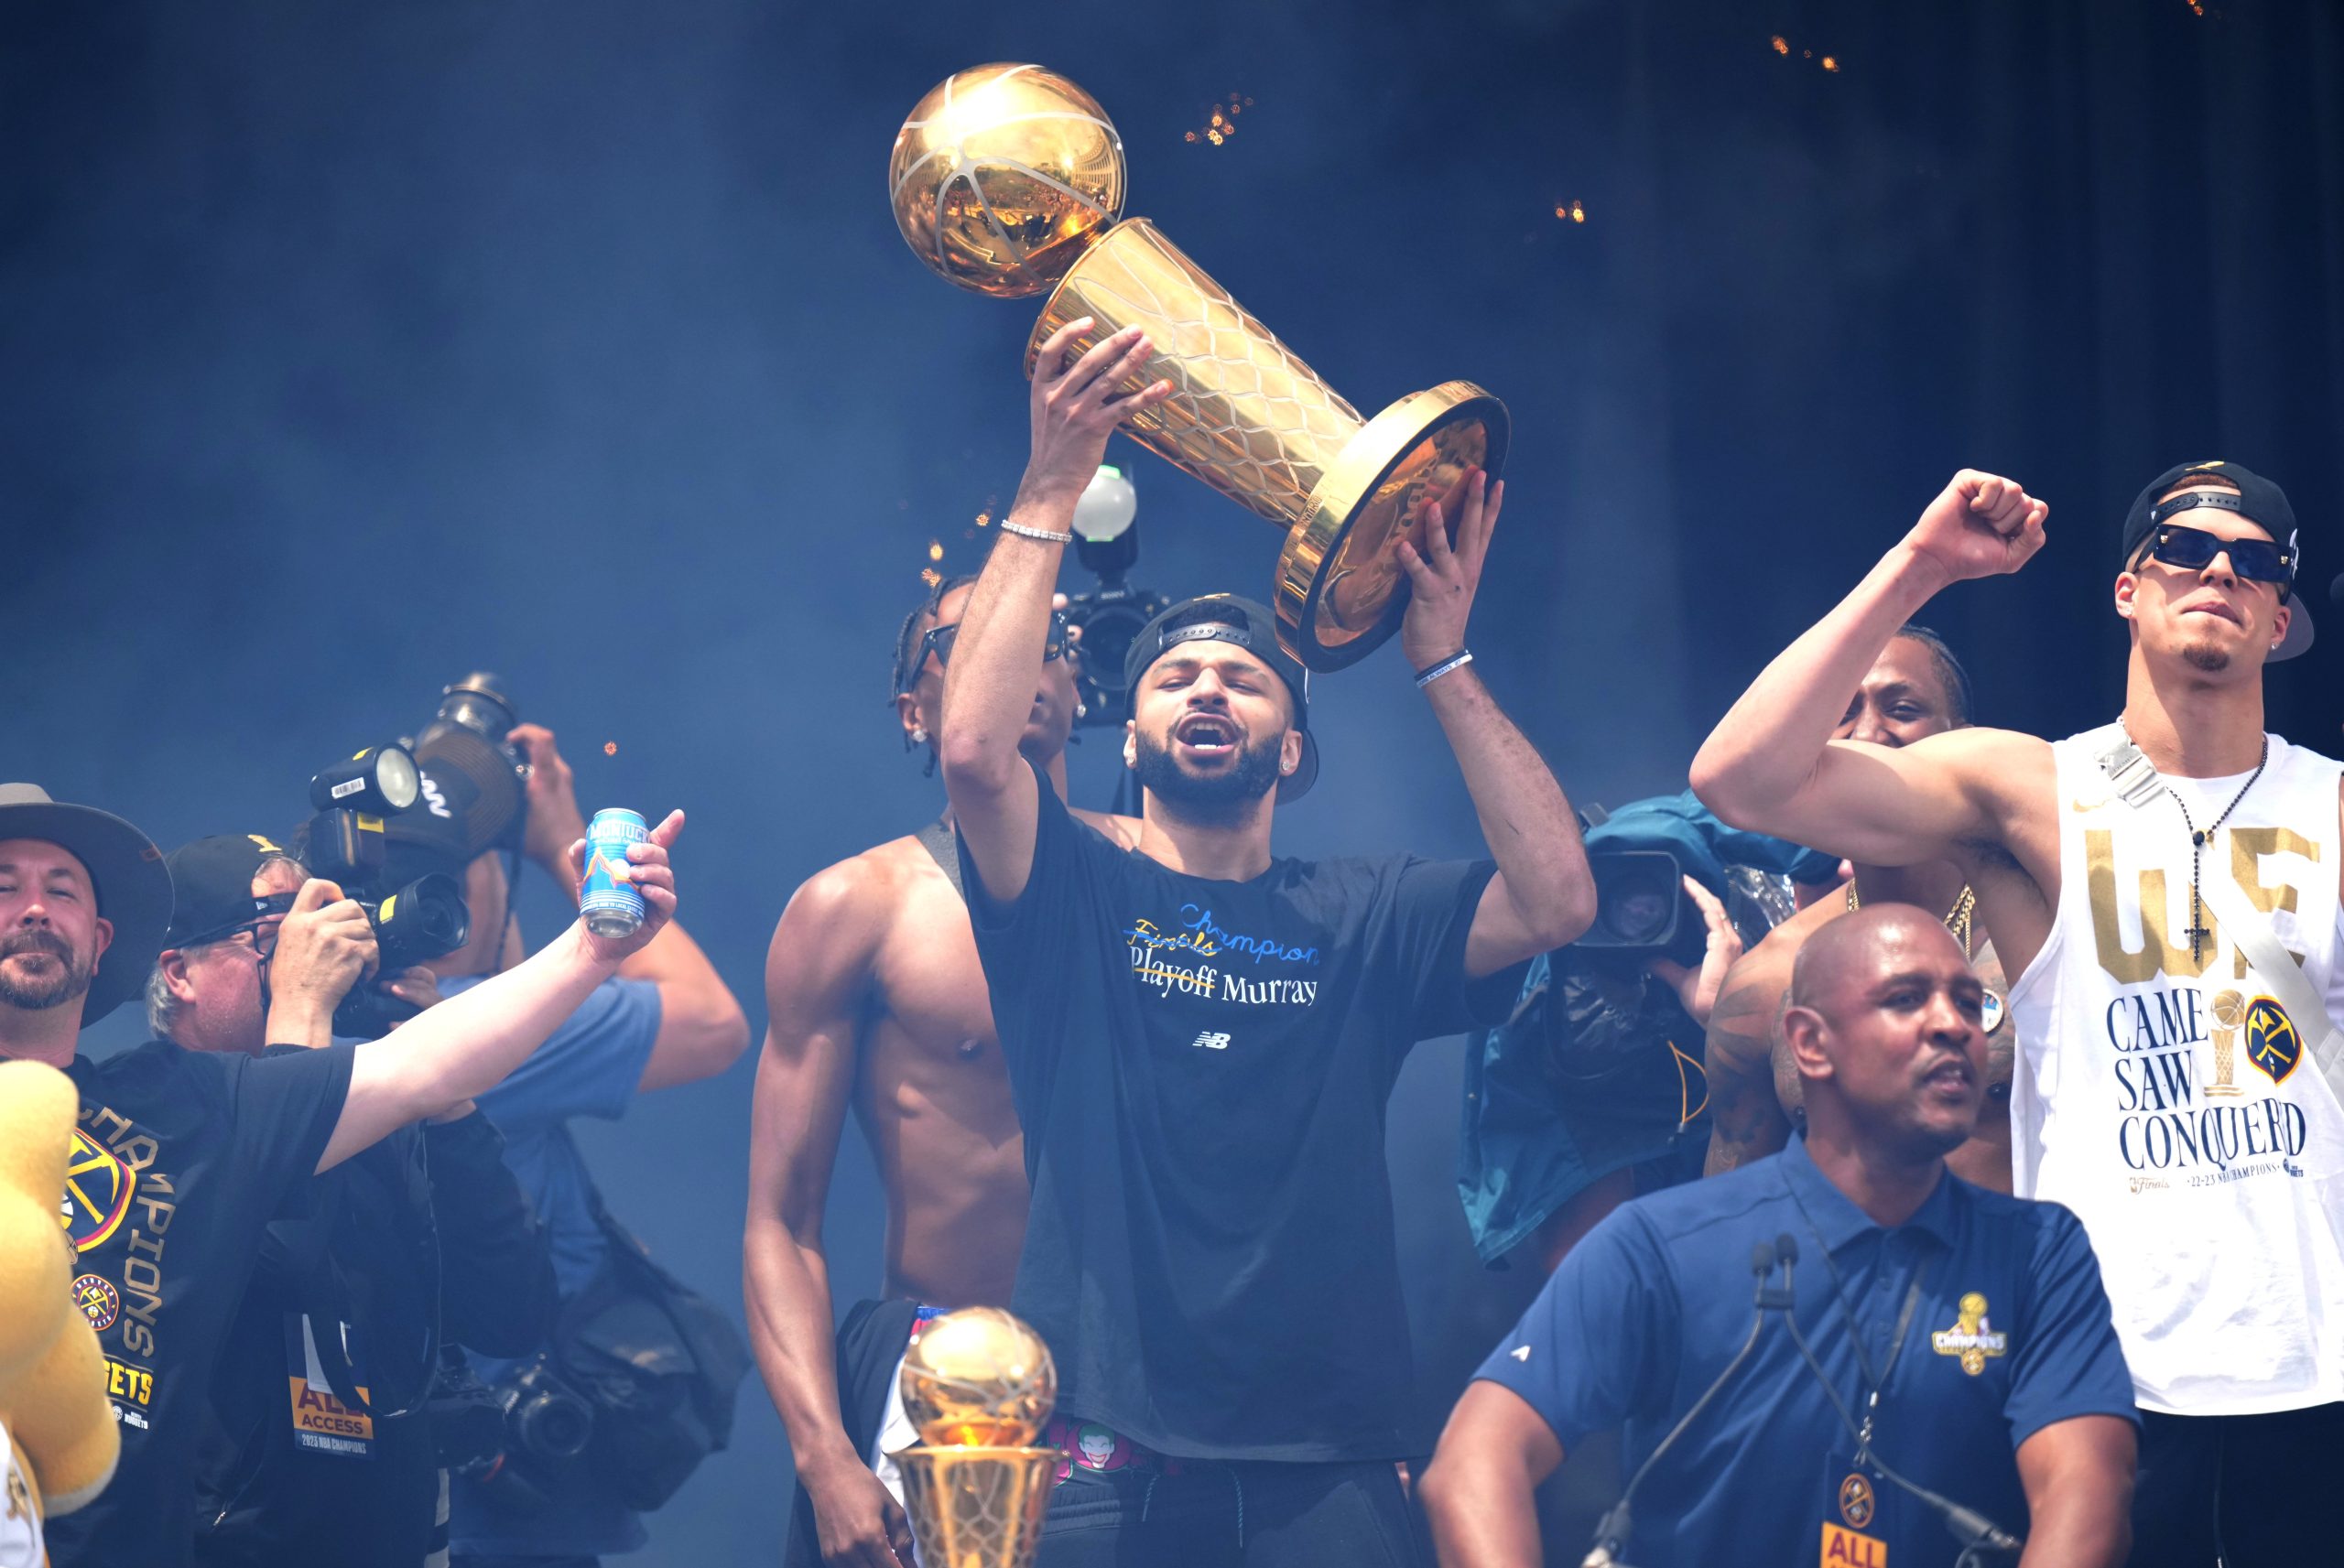 Denver Nuggets point guard Jamal Murray holding the Larry O'Brien trophy over his head at the Nuggets Championship parade